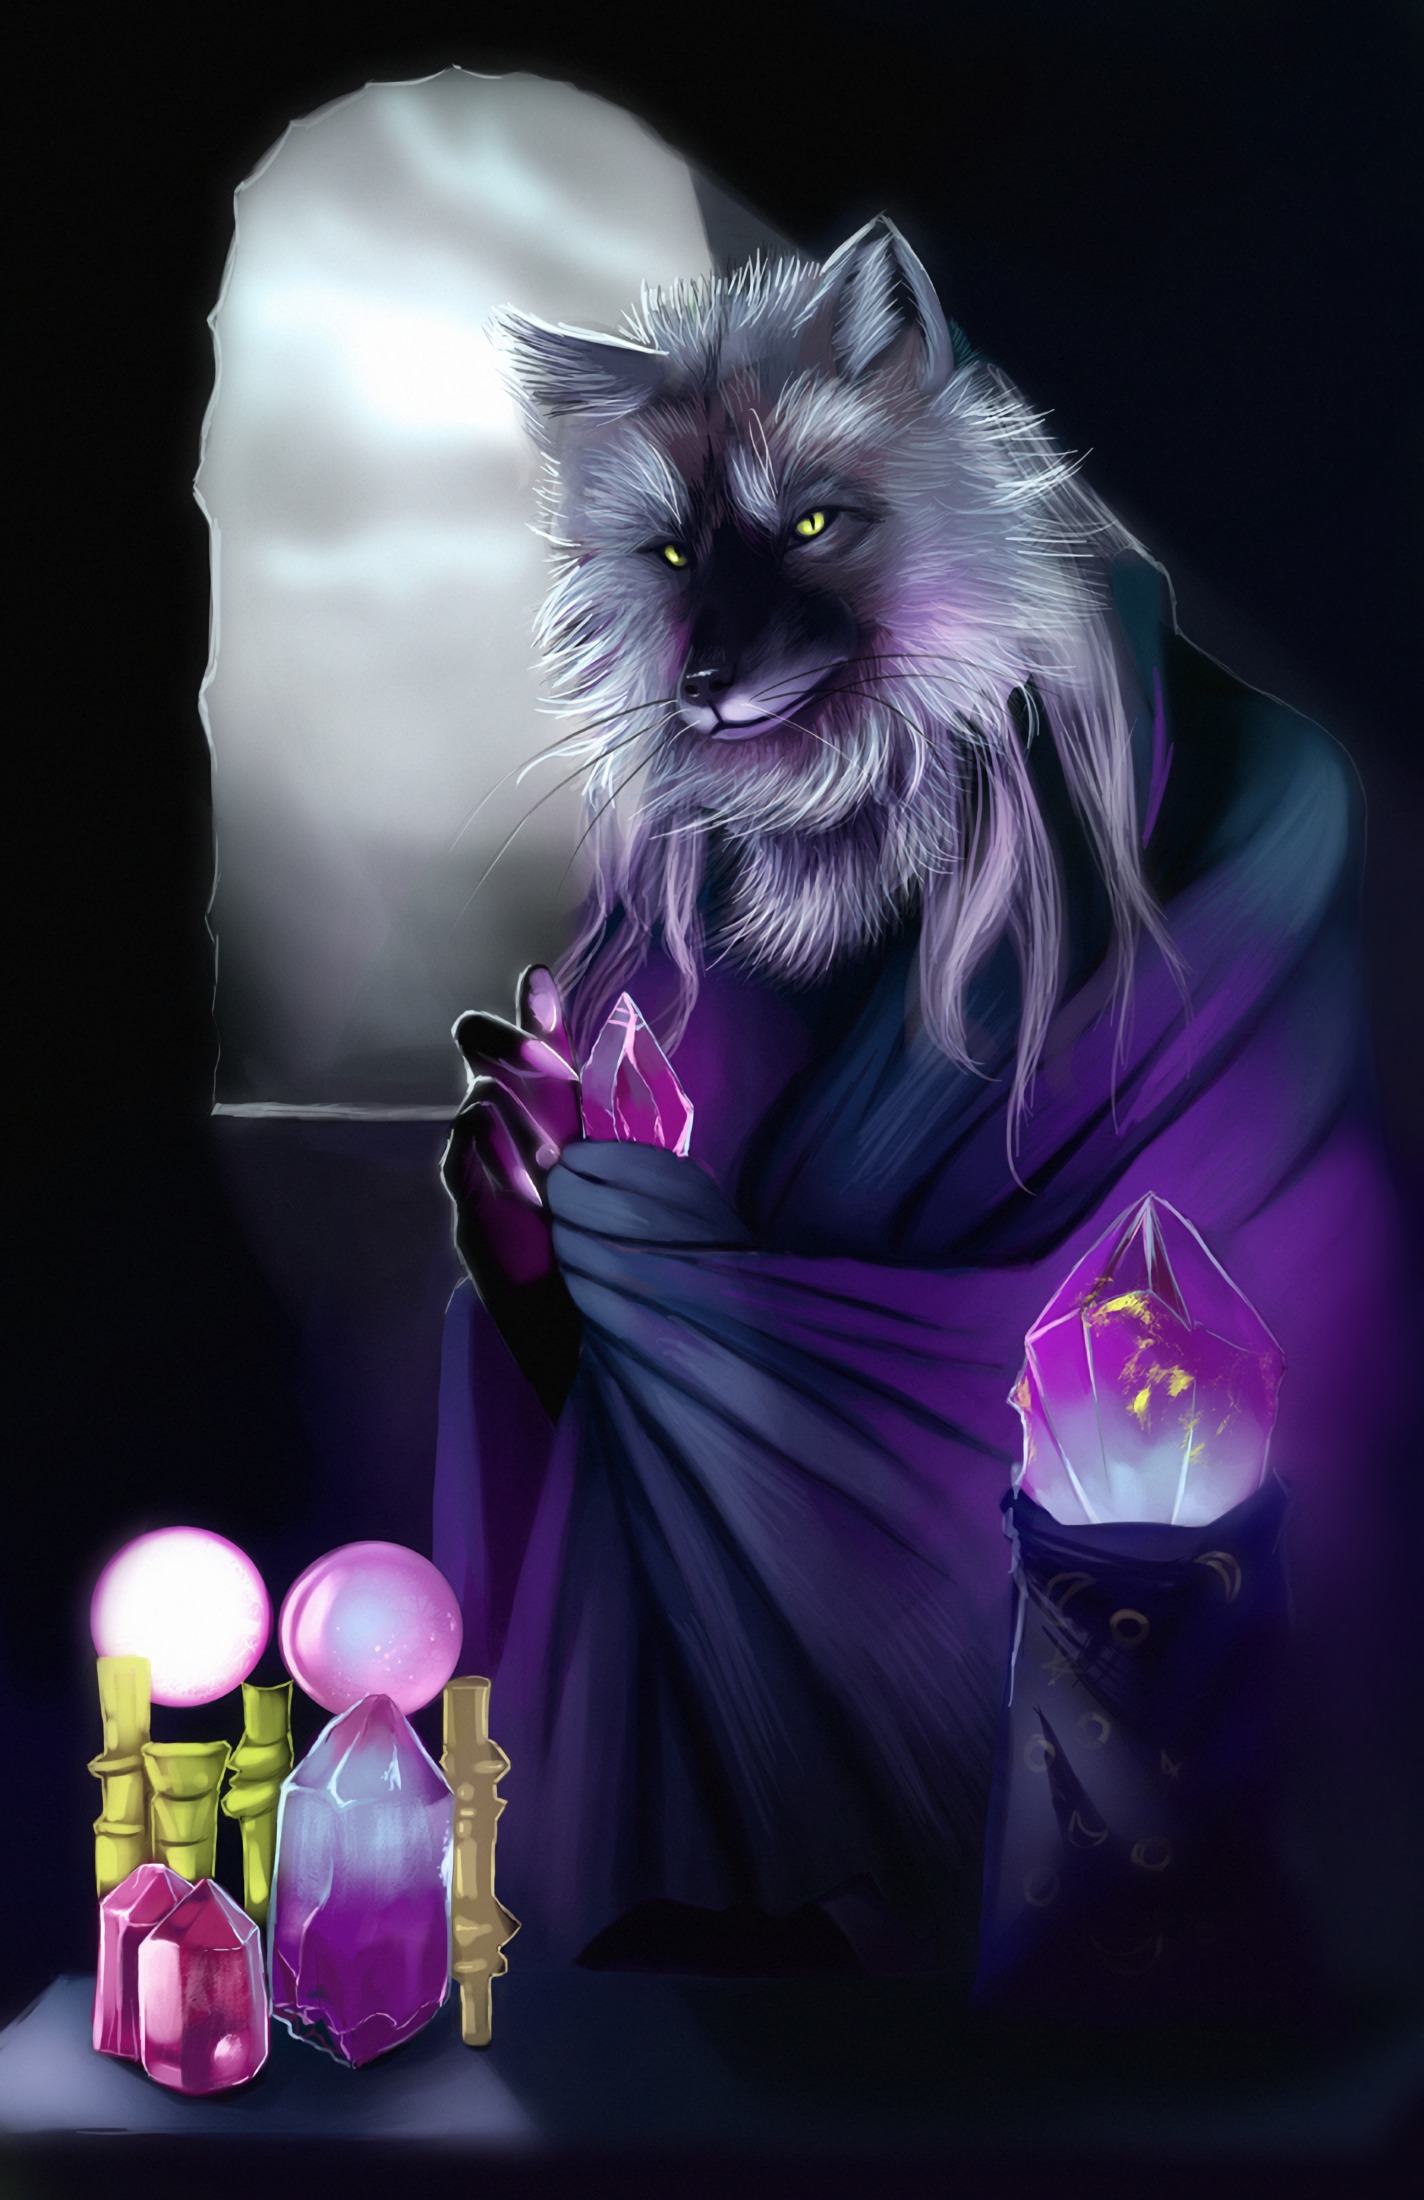 magic, art, wolf, crystals, alchemist wallpaper for mobile